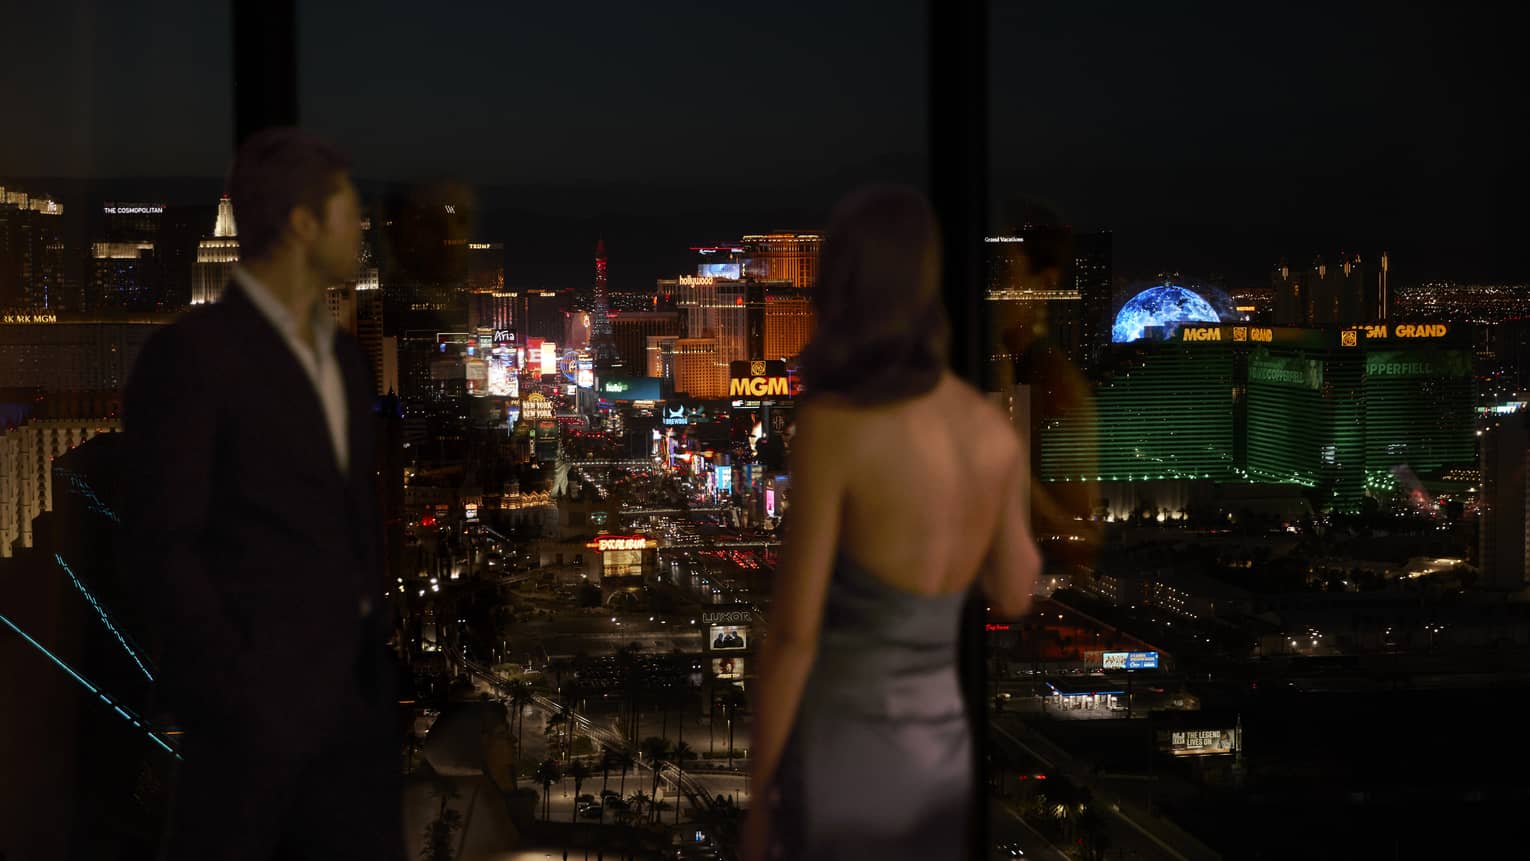 A man and woman looking out at a city covered in lights at night.